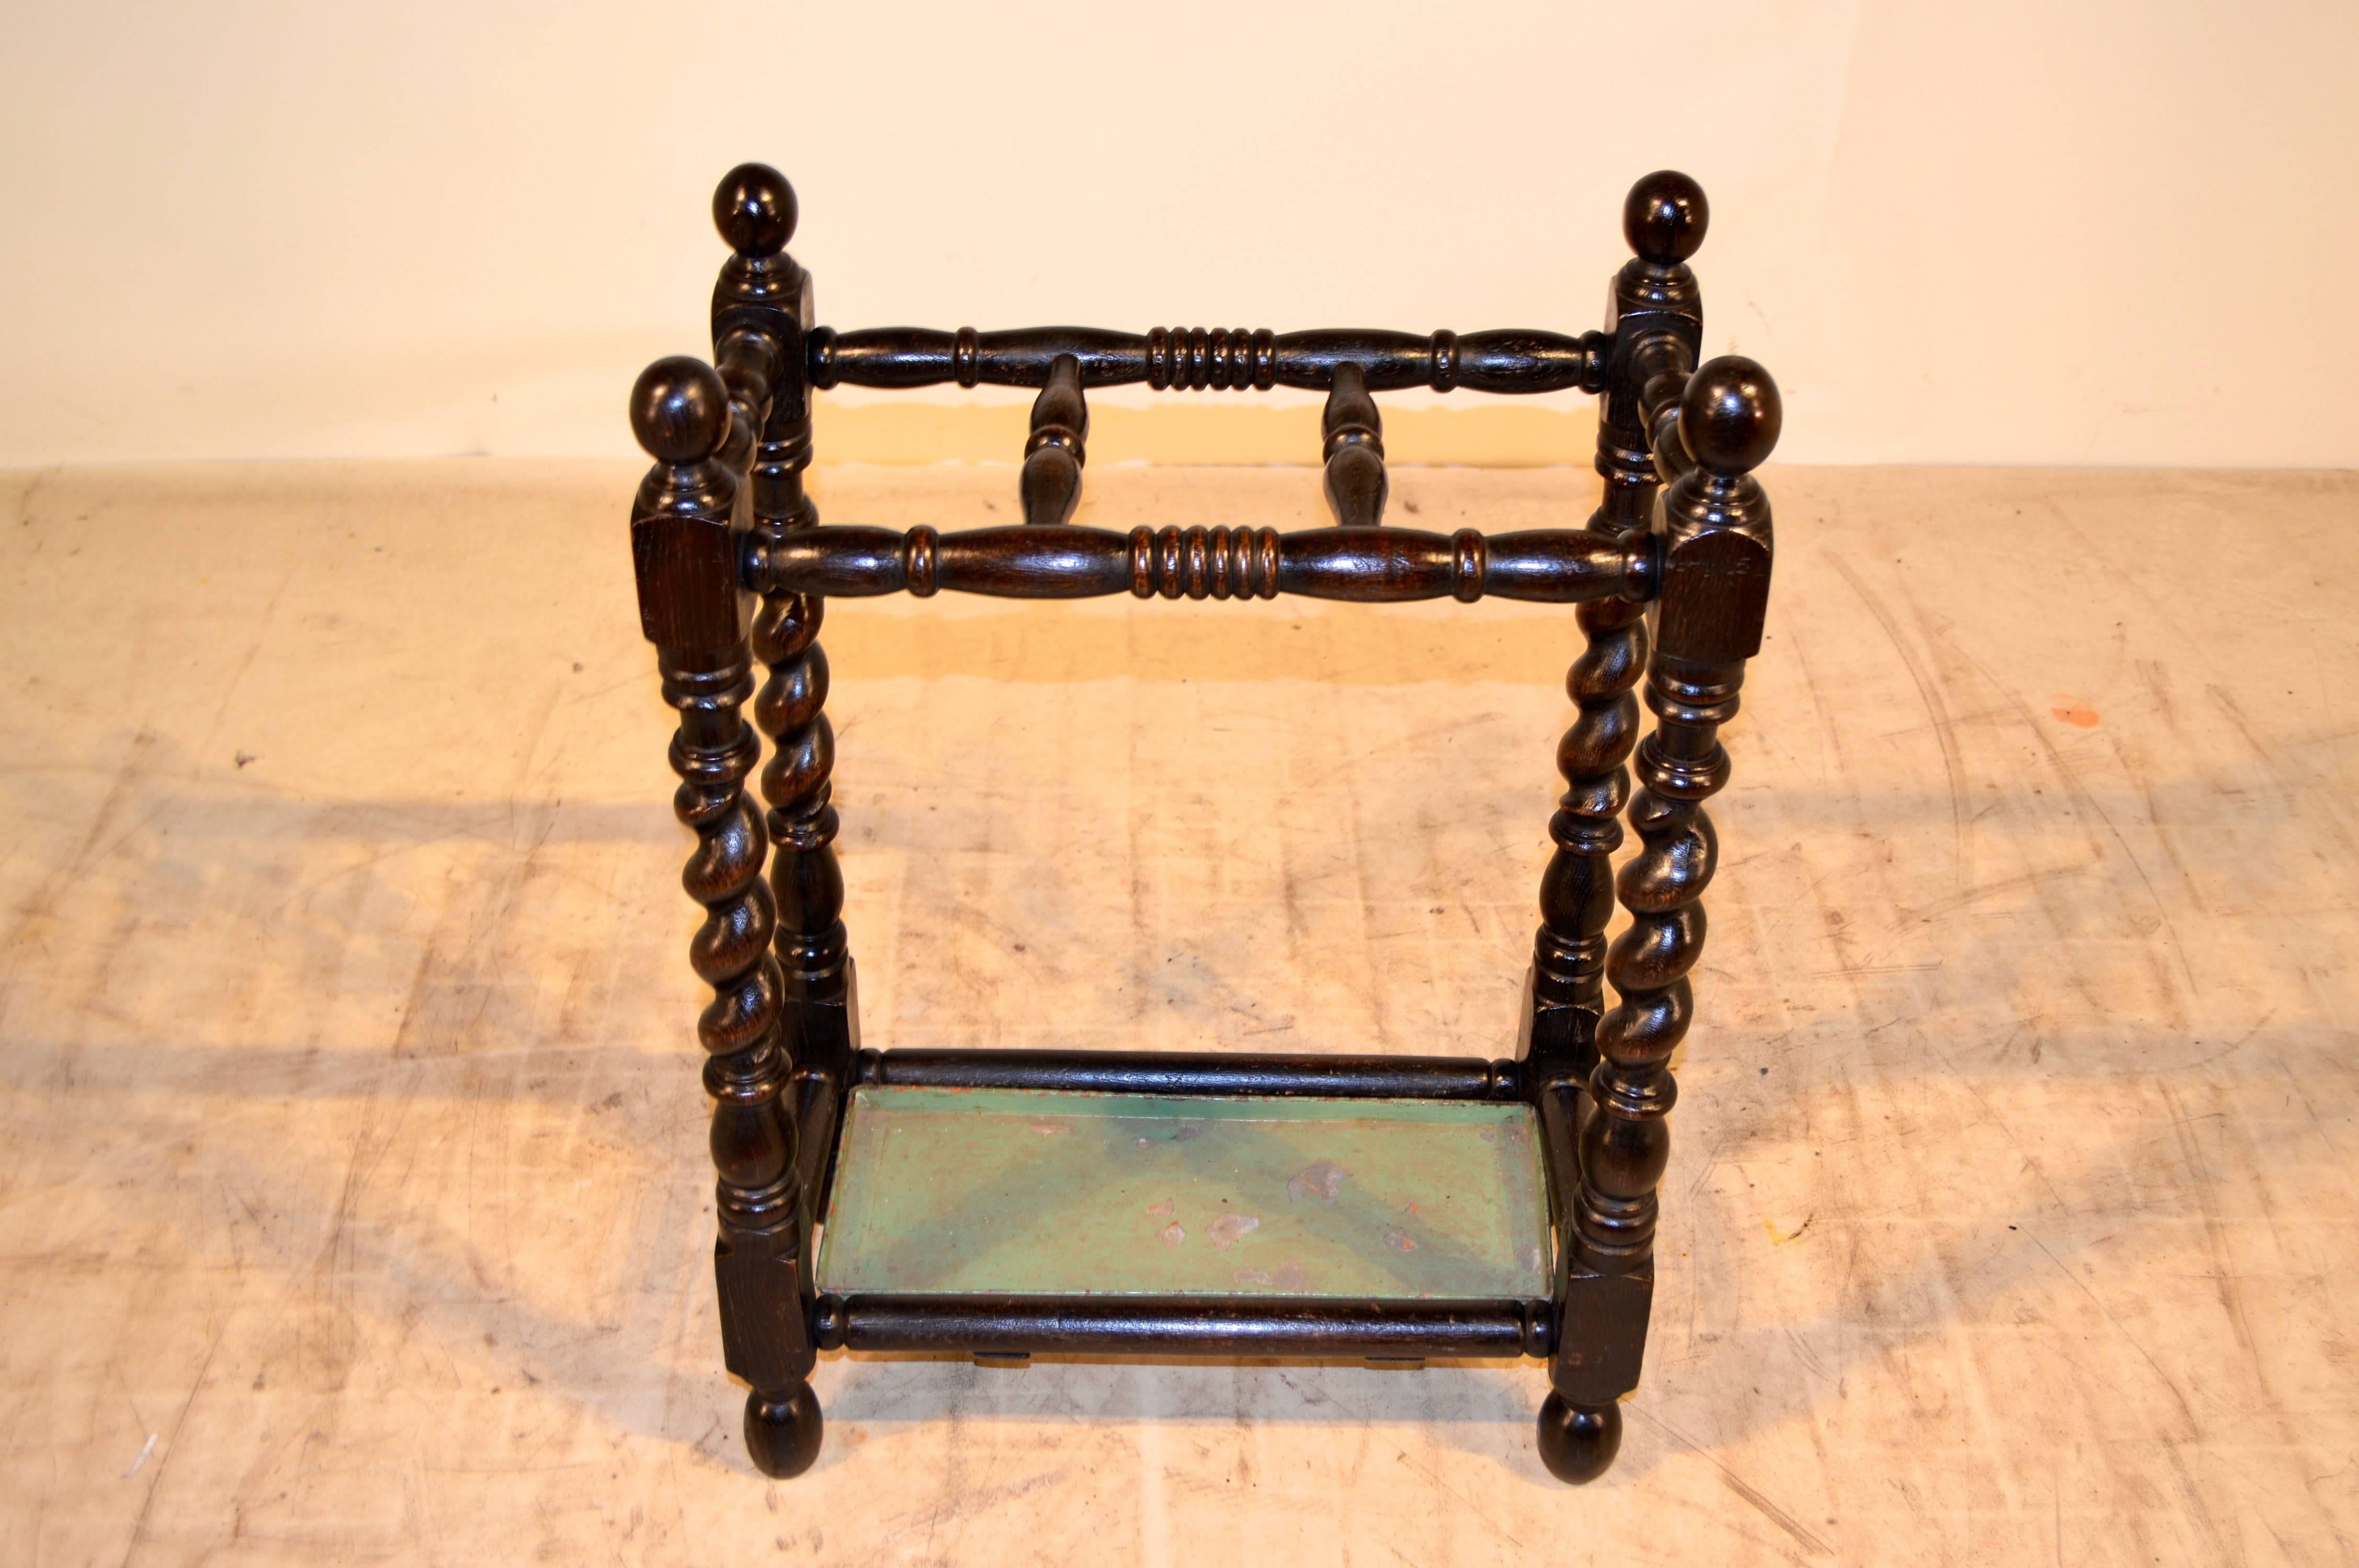 19th century English umbrella stand late 19th century English umbrella stand with nicely turned top rails and finials, following down to hand-turned barley twist legs and turned feet. The original tray has paint loss from normal wear.